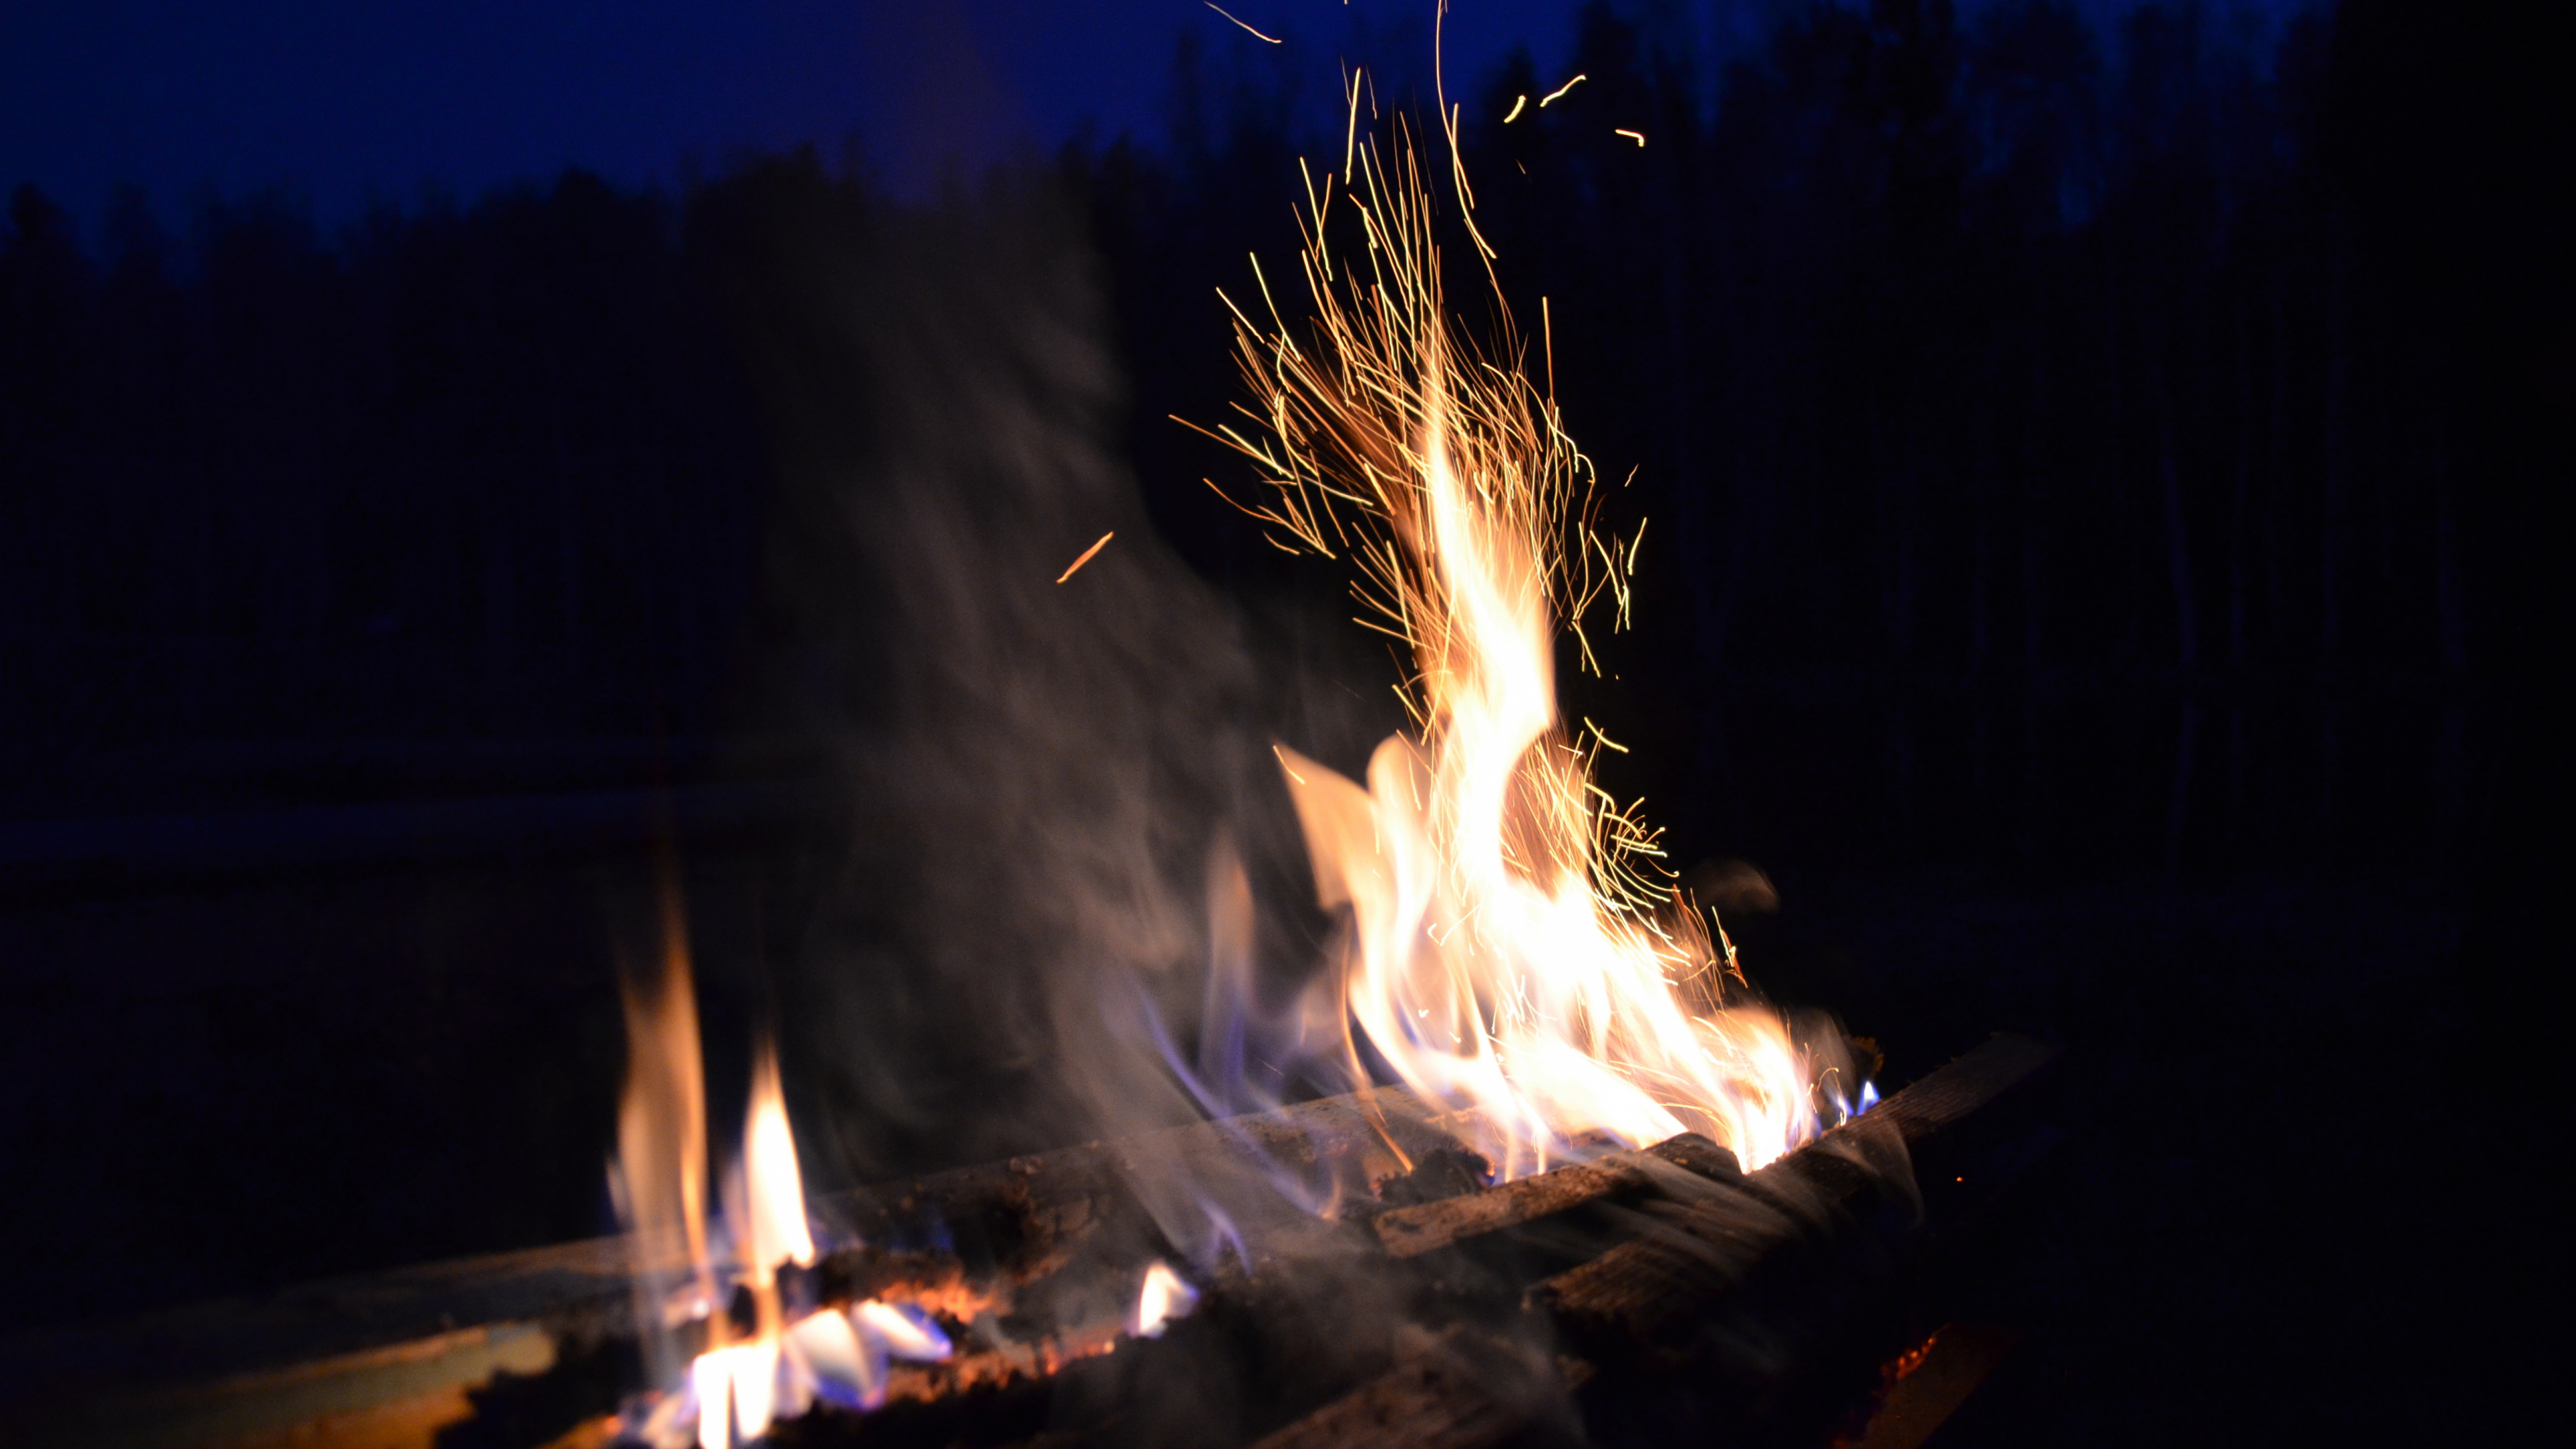 Time Lapse Photography of Fire. Wallpaper in 3840x2160 Resolution